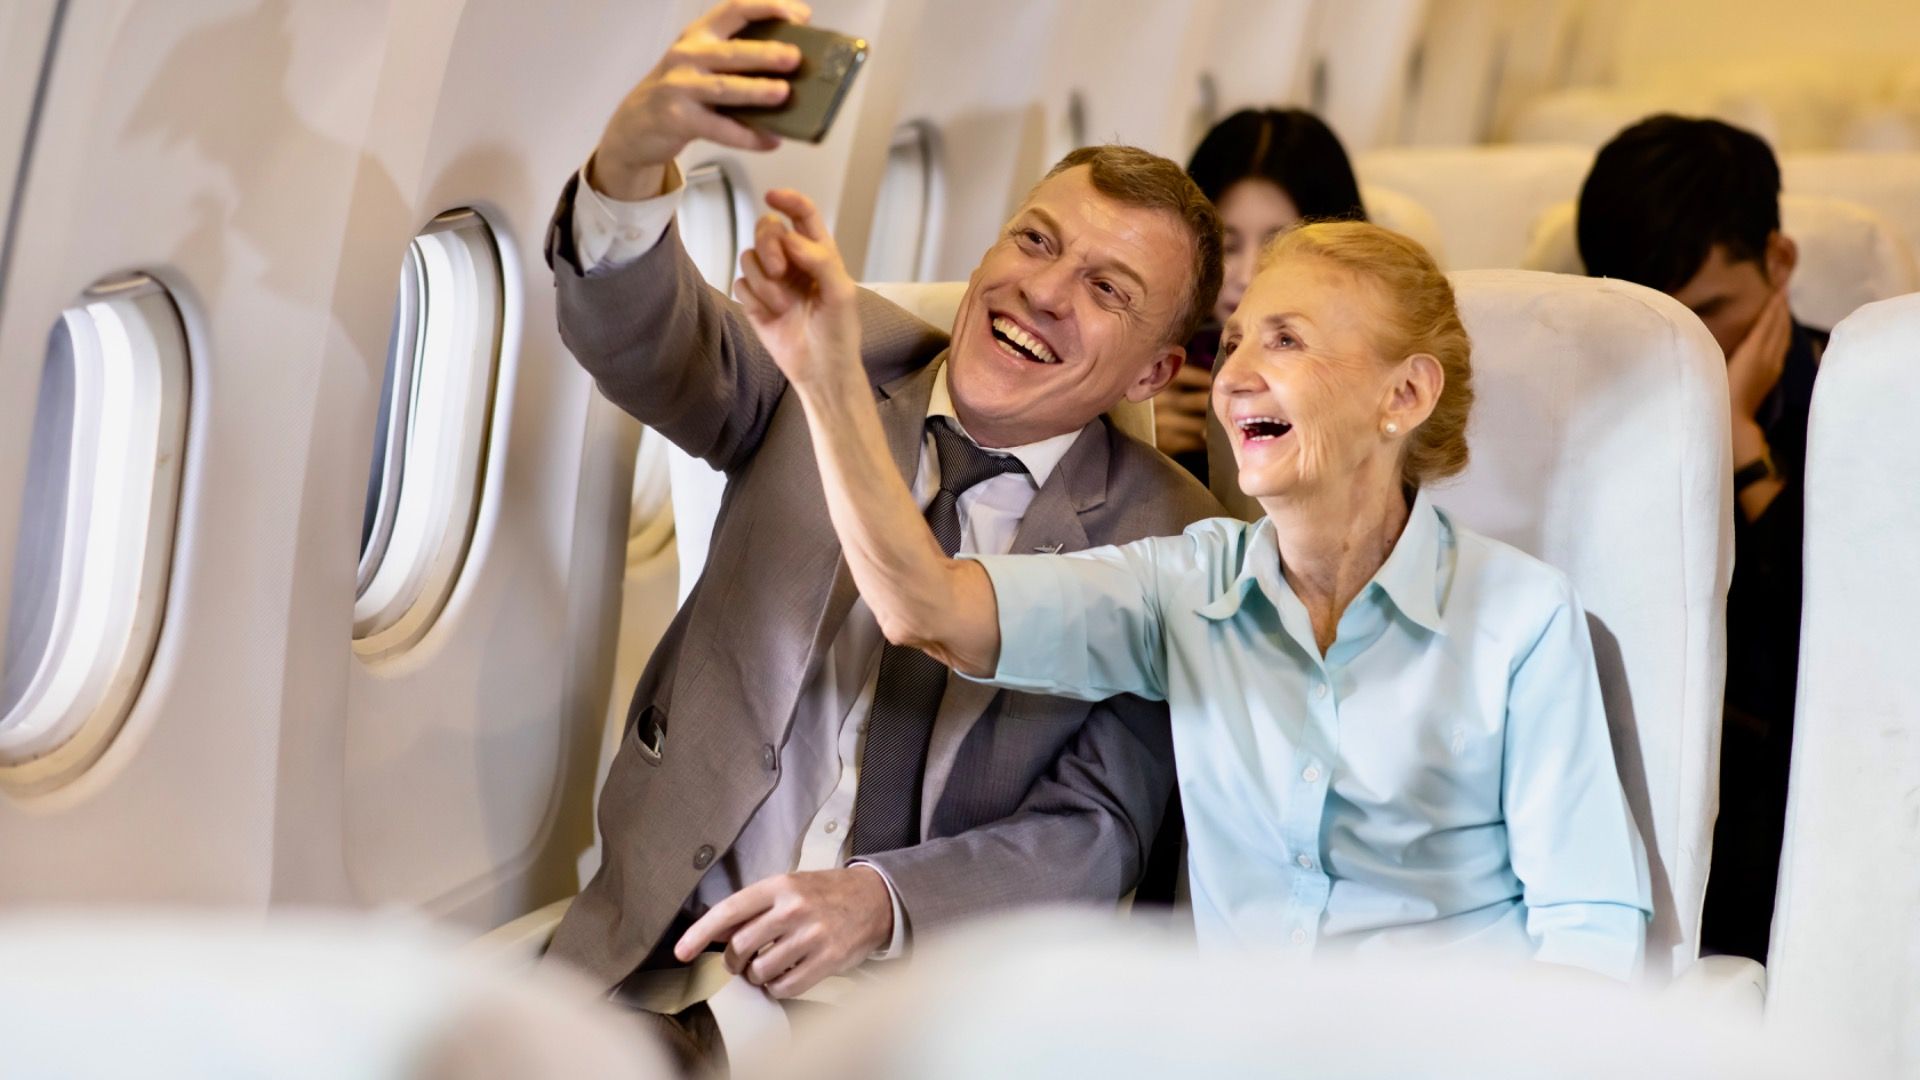 Happy Senior business man and mother passenger make selfie photo sitting in comfortable business class seat.